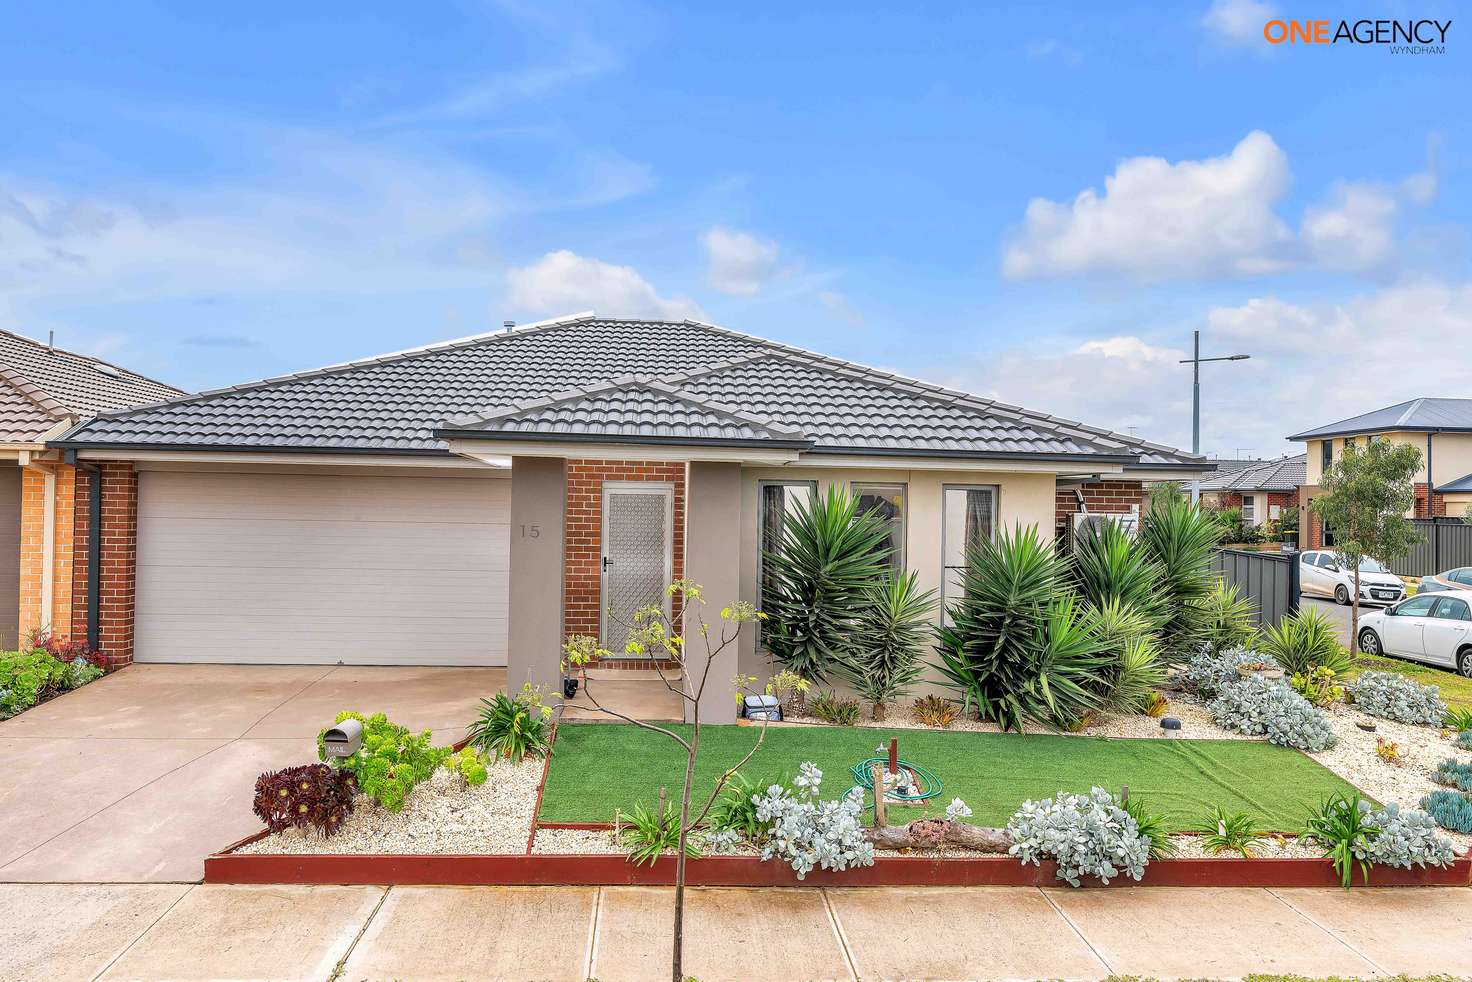 Main view of Homely house listing, 15 Thorngrove Street, Truganina VIC 3029